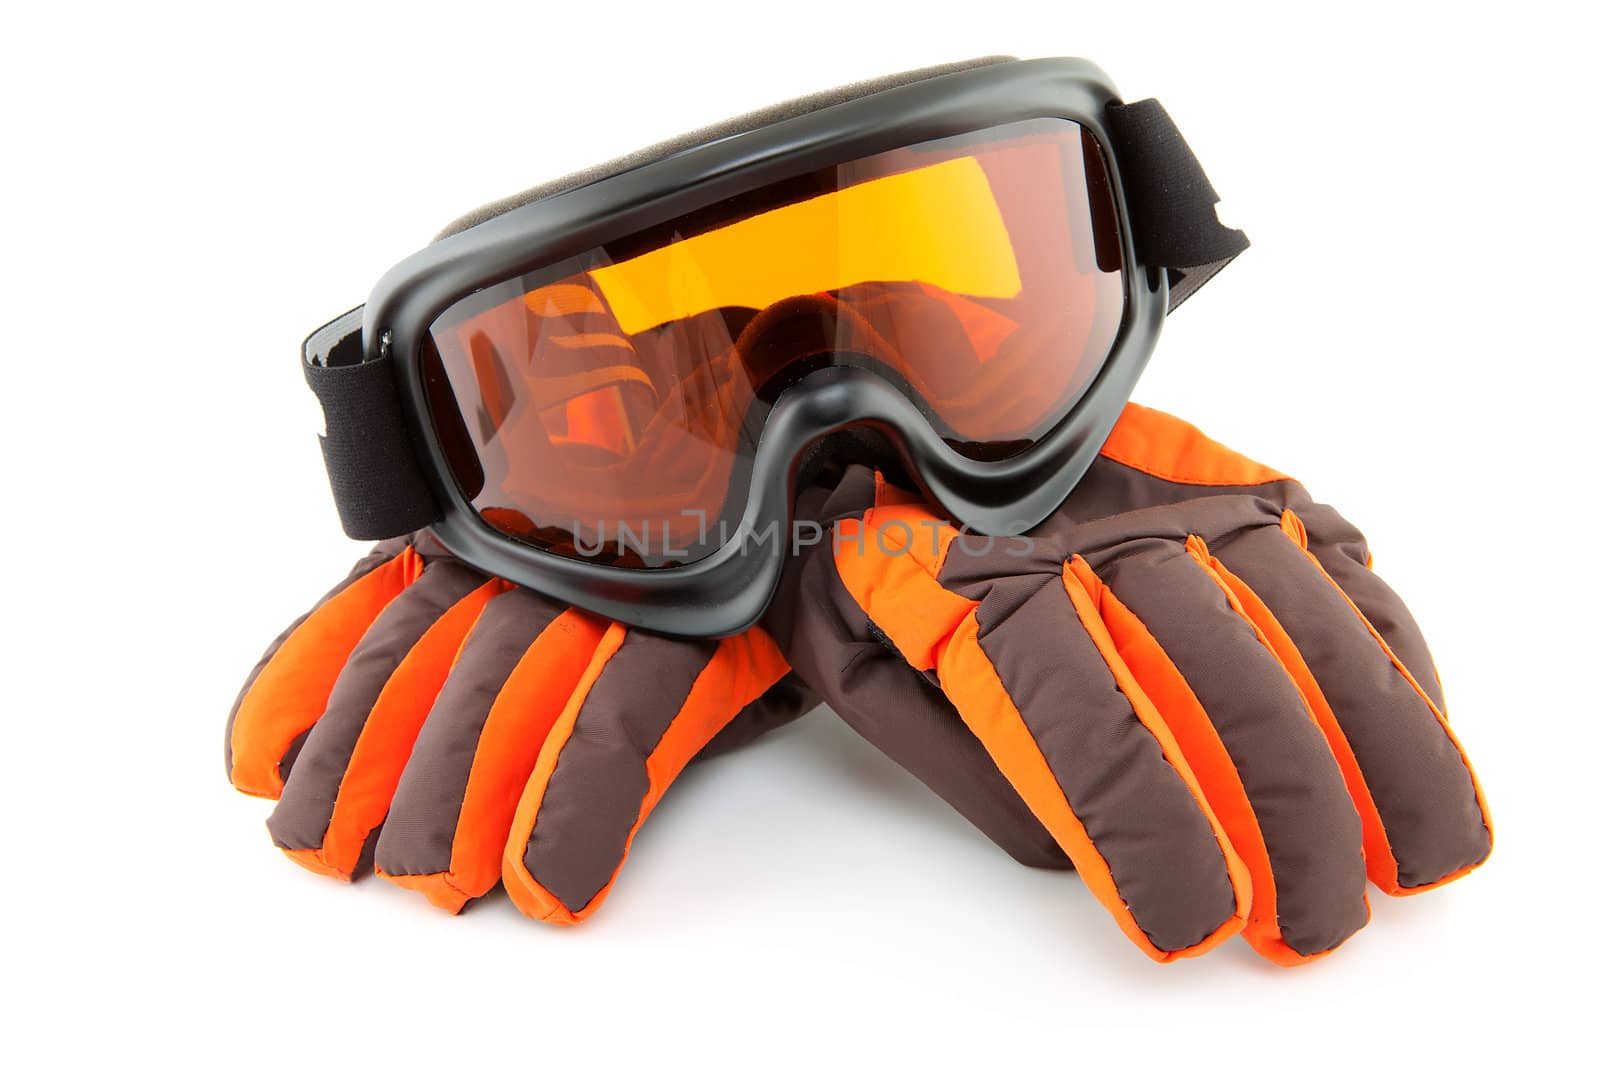 ski goggles and gloves isolated on white background